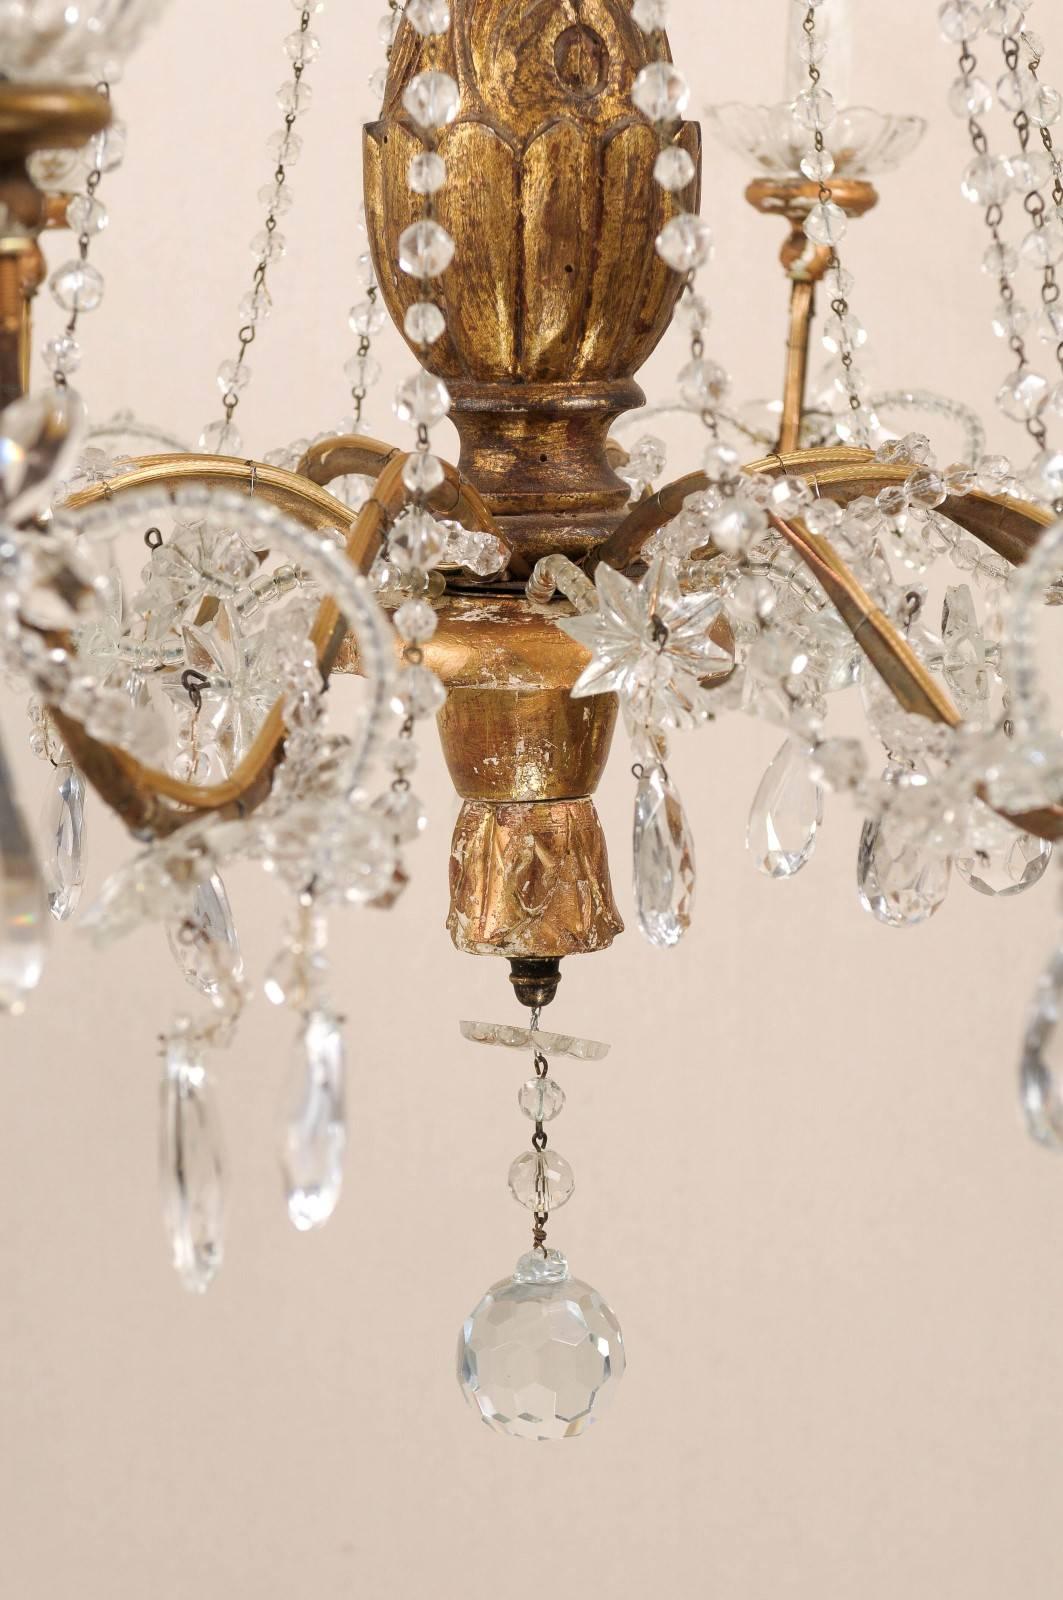 Italian Crystal and Giltwood Chandelier from the 19th Century - Gold Color 4